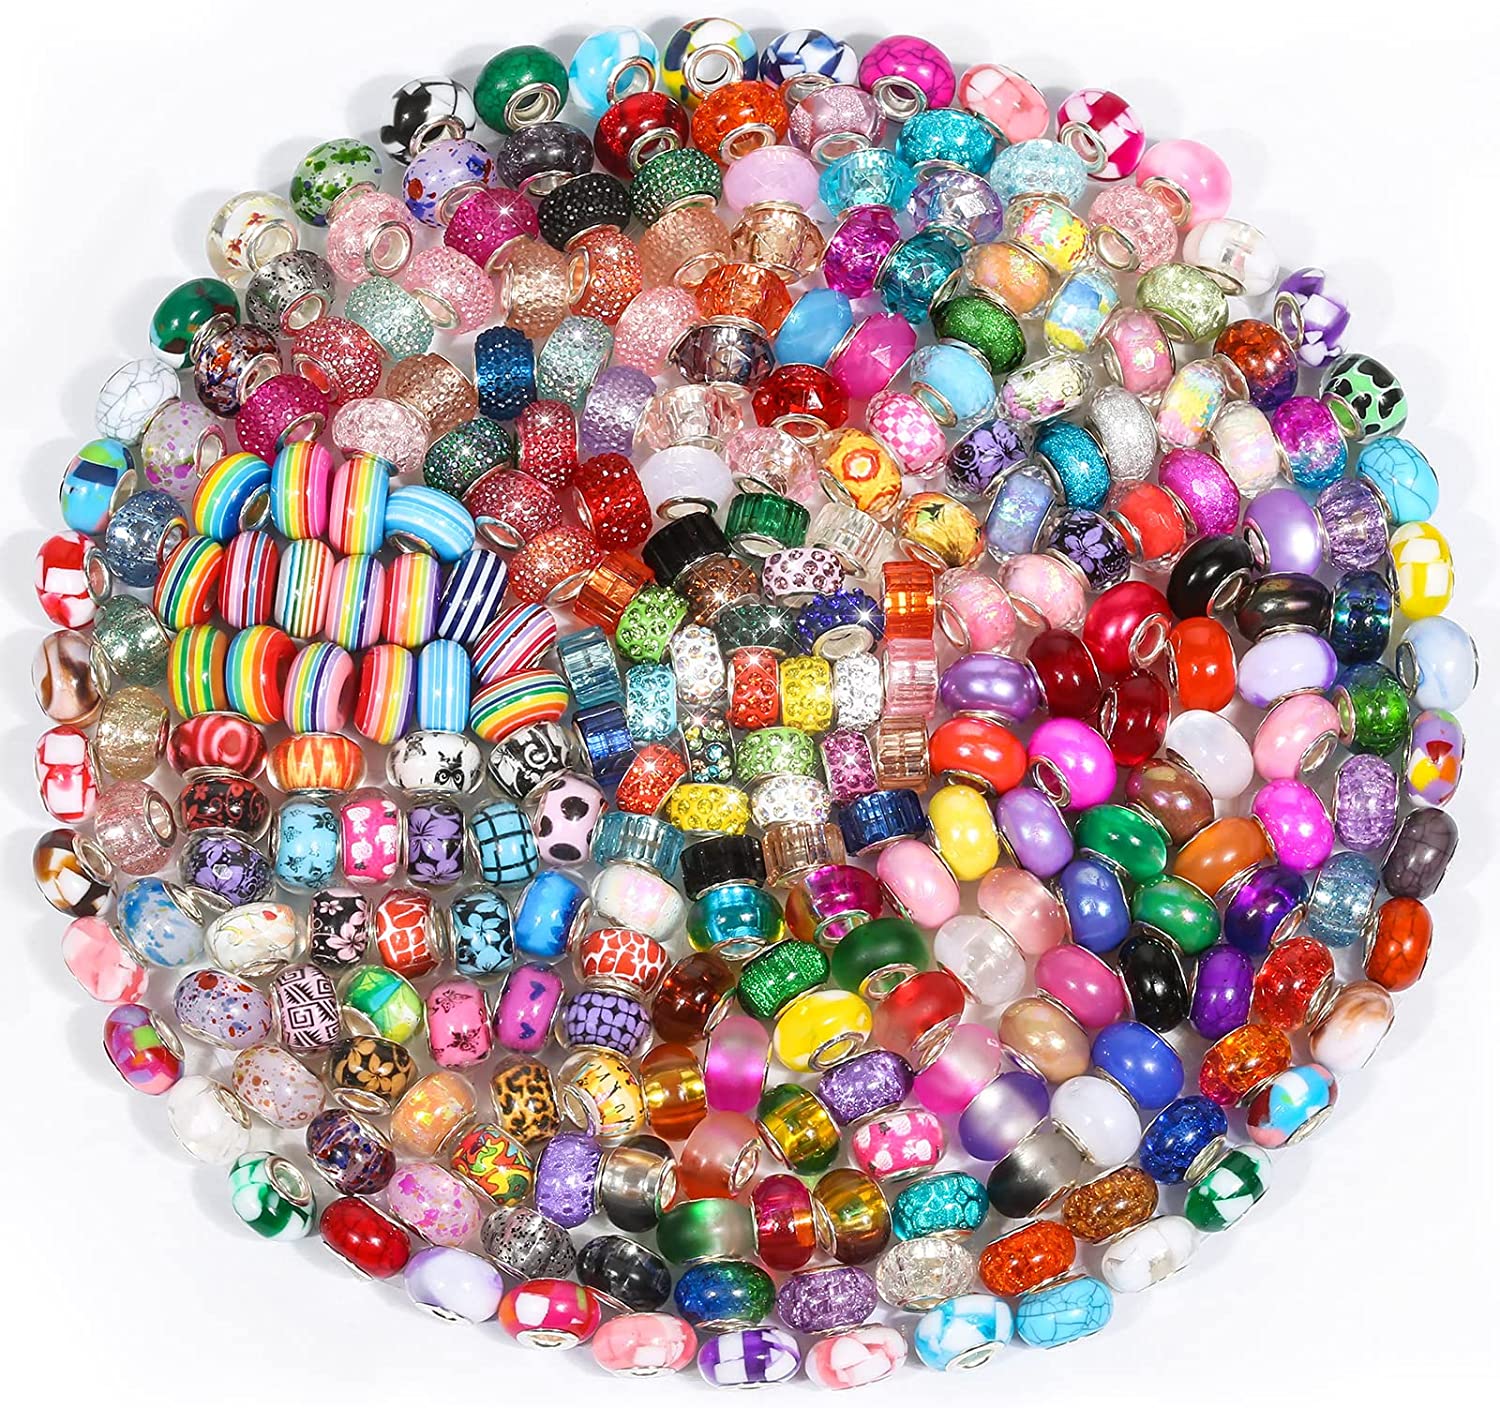 223 PCS Large Hole Glass Beads for Jewelry Making, Cludoo European Beads  Bulk Mixed Color Spacer Beads with Rhinestones Lampwork Beads for DIY Craft  Charms Bracelet Necklace Earring Making